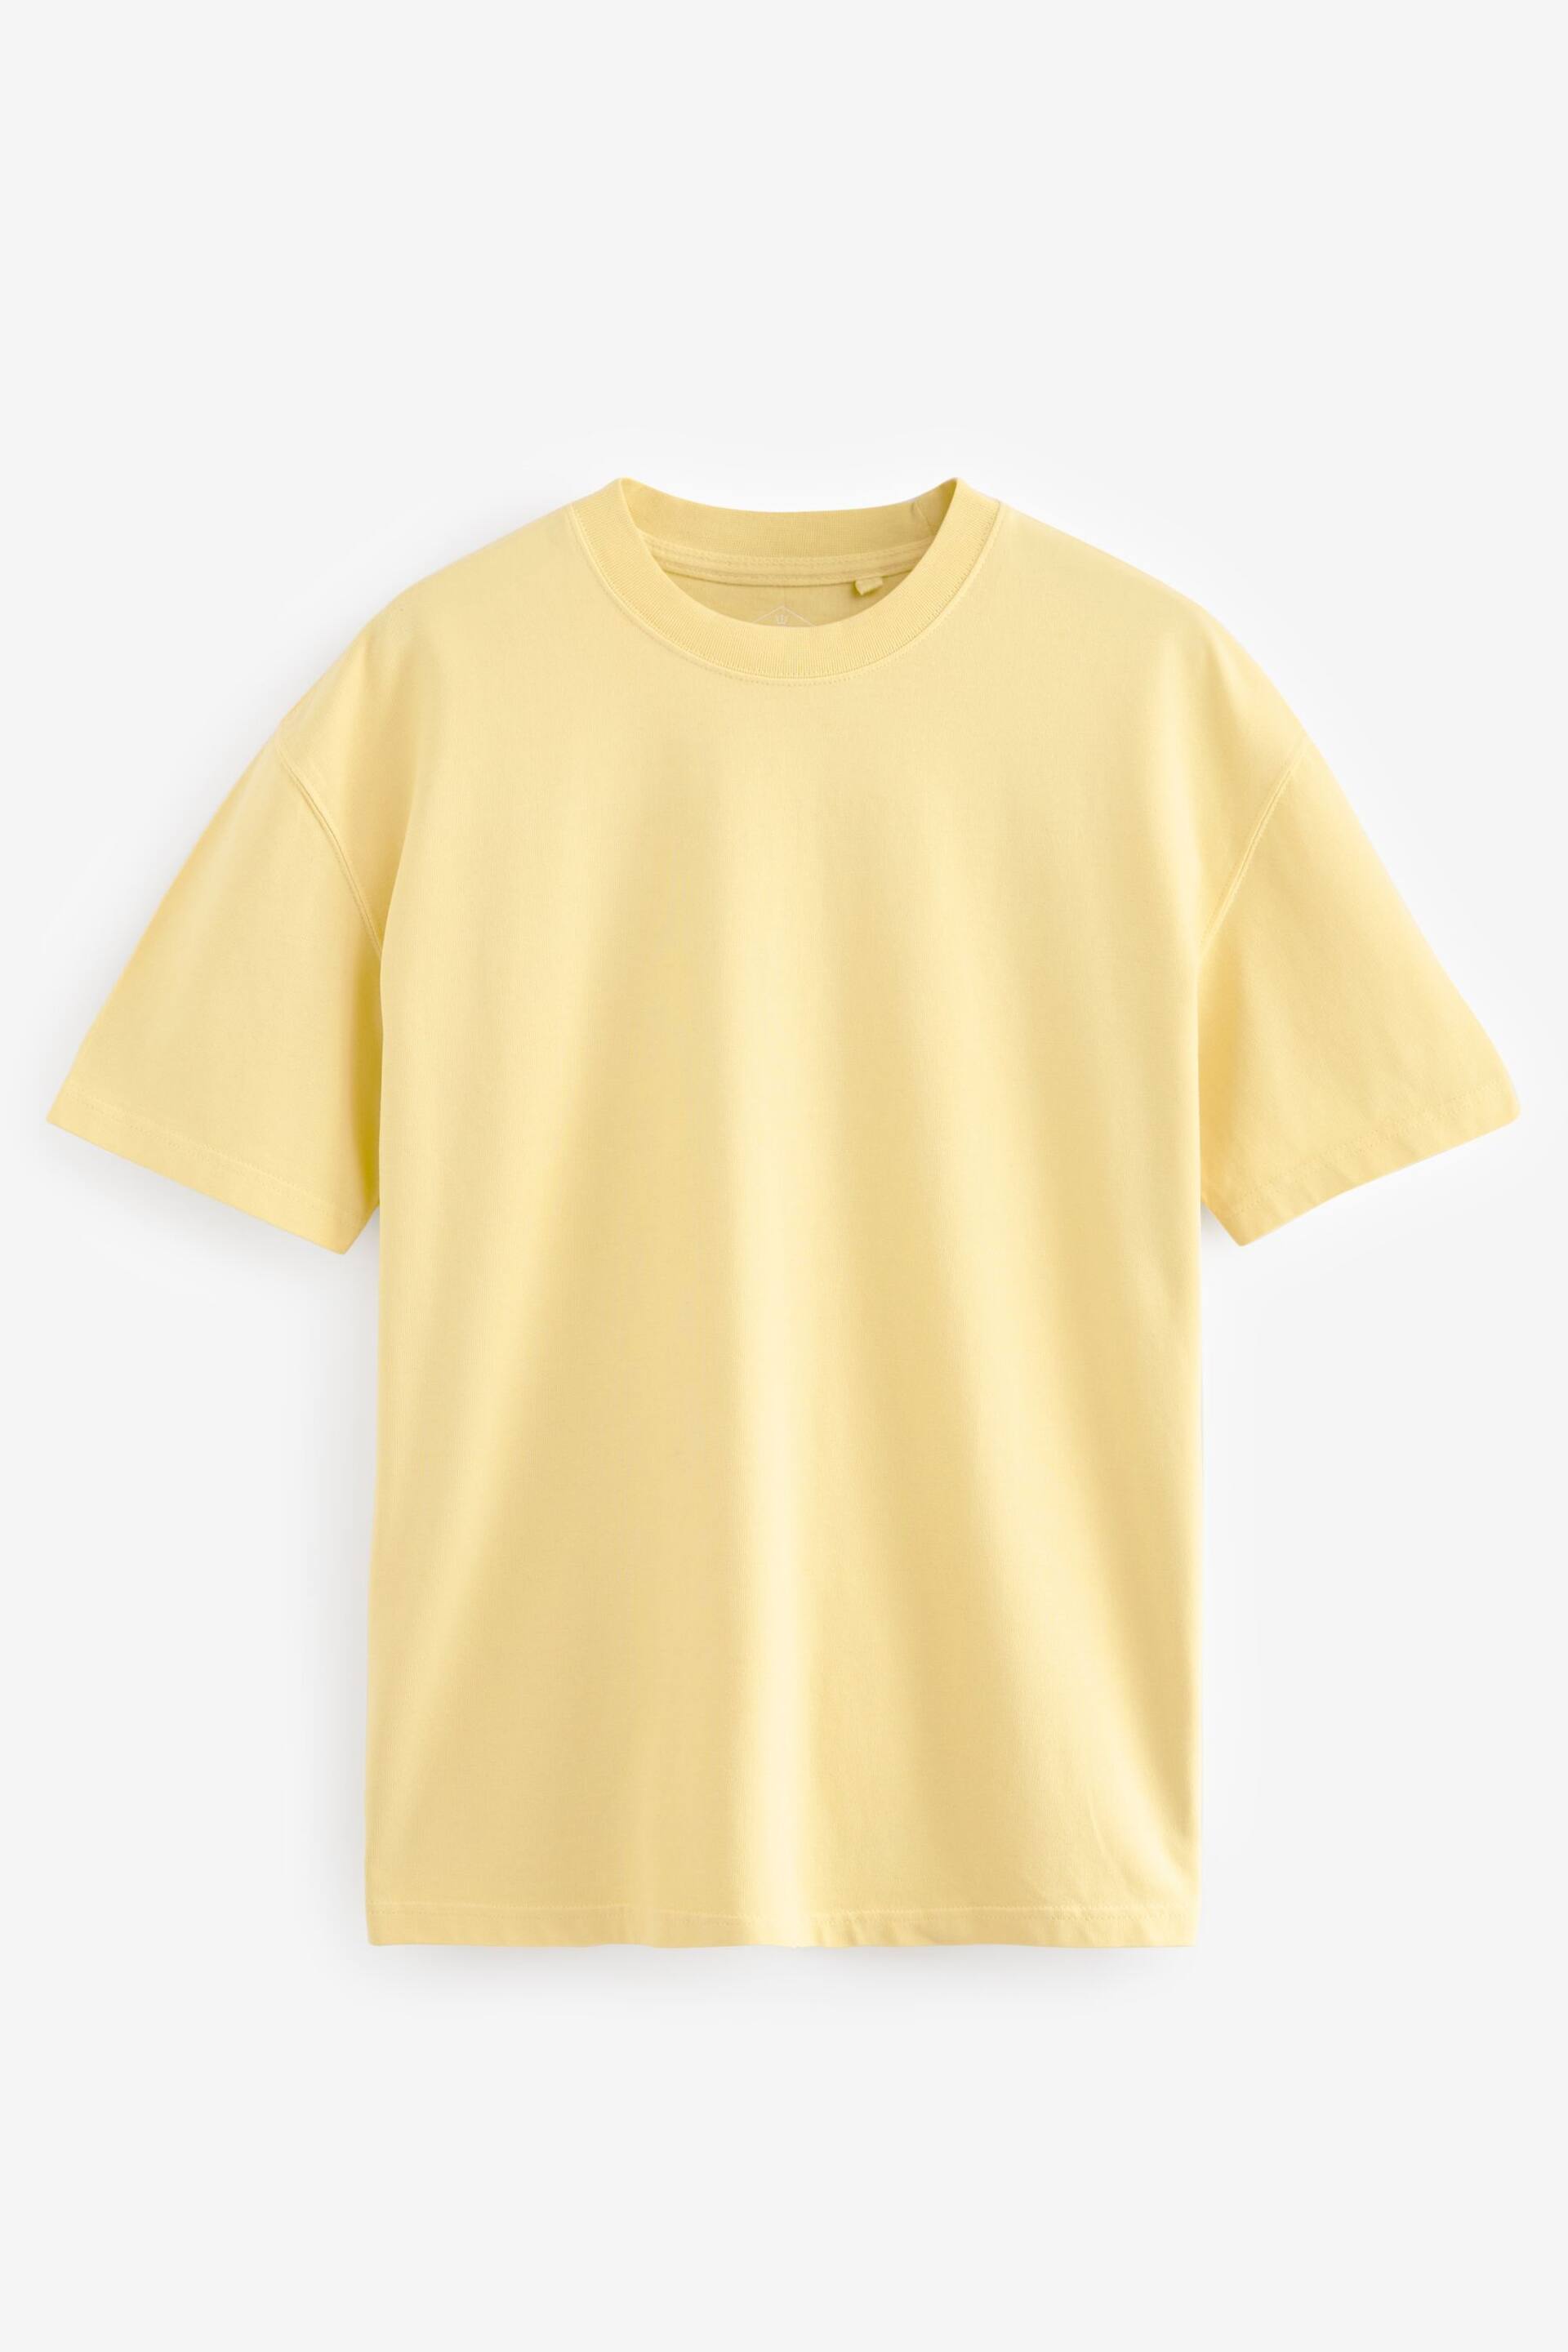 Yellow Garment Dye Relaxed Fit Heavyweight T-Shirt - Image 3 of 5